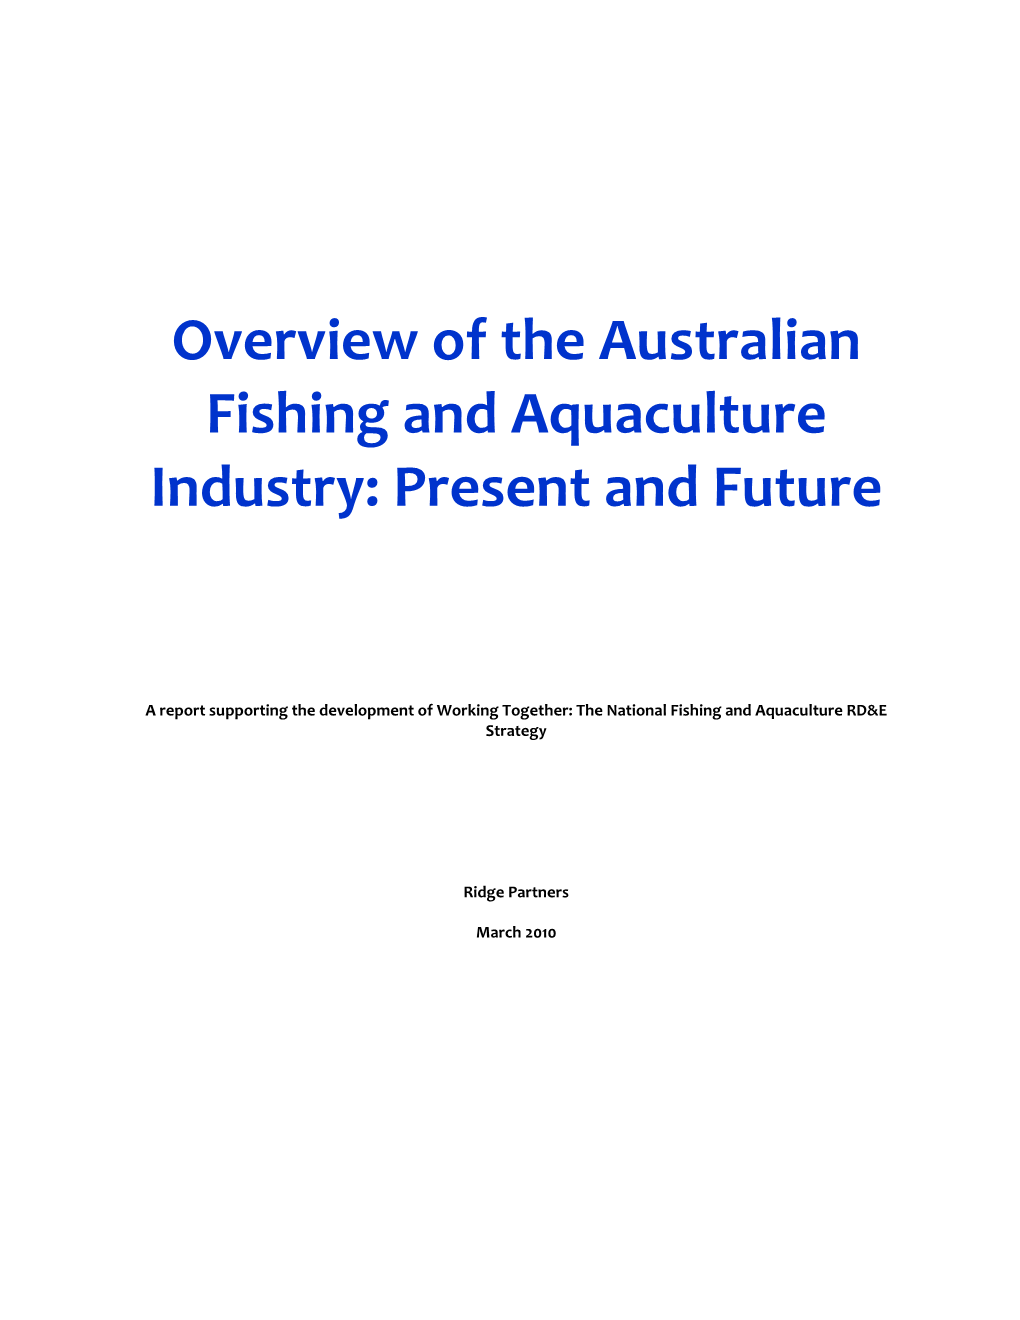 Overview of the Australian Fishing and Aquaculture Industry: Present and Future